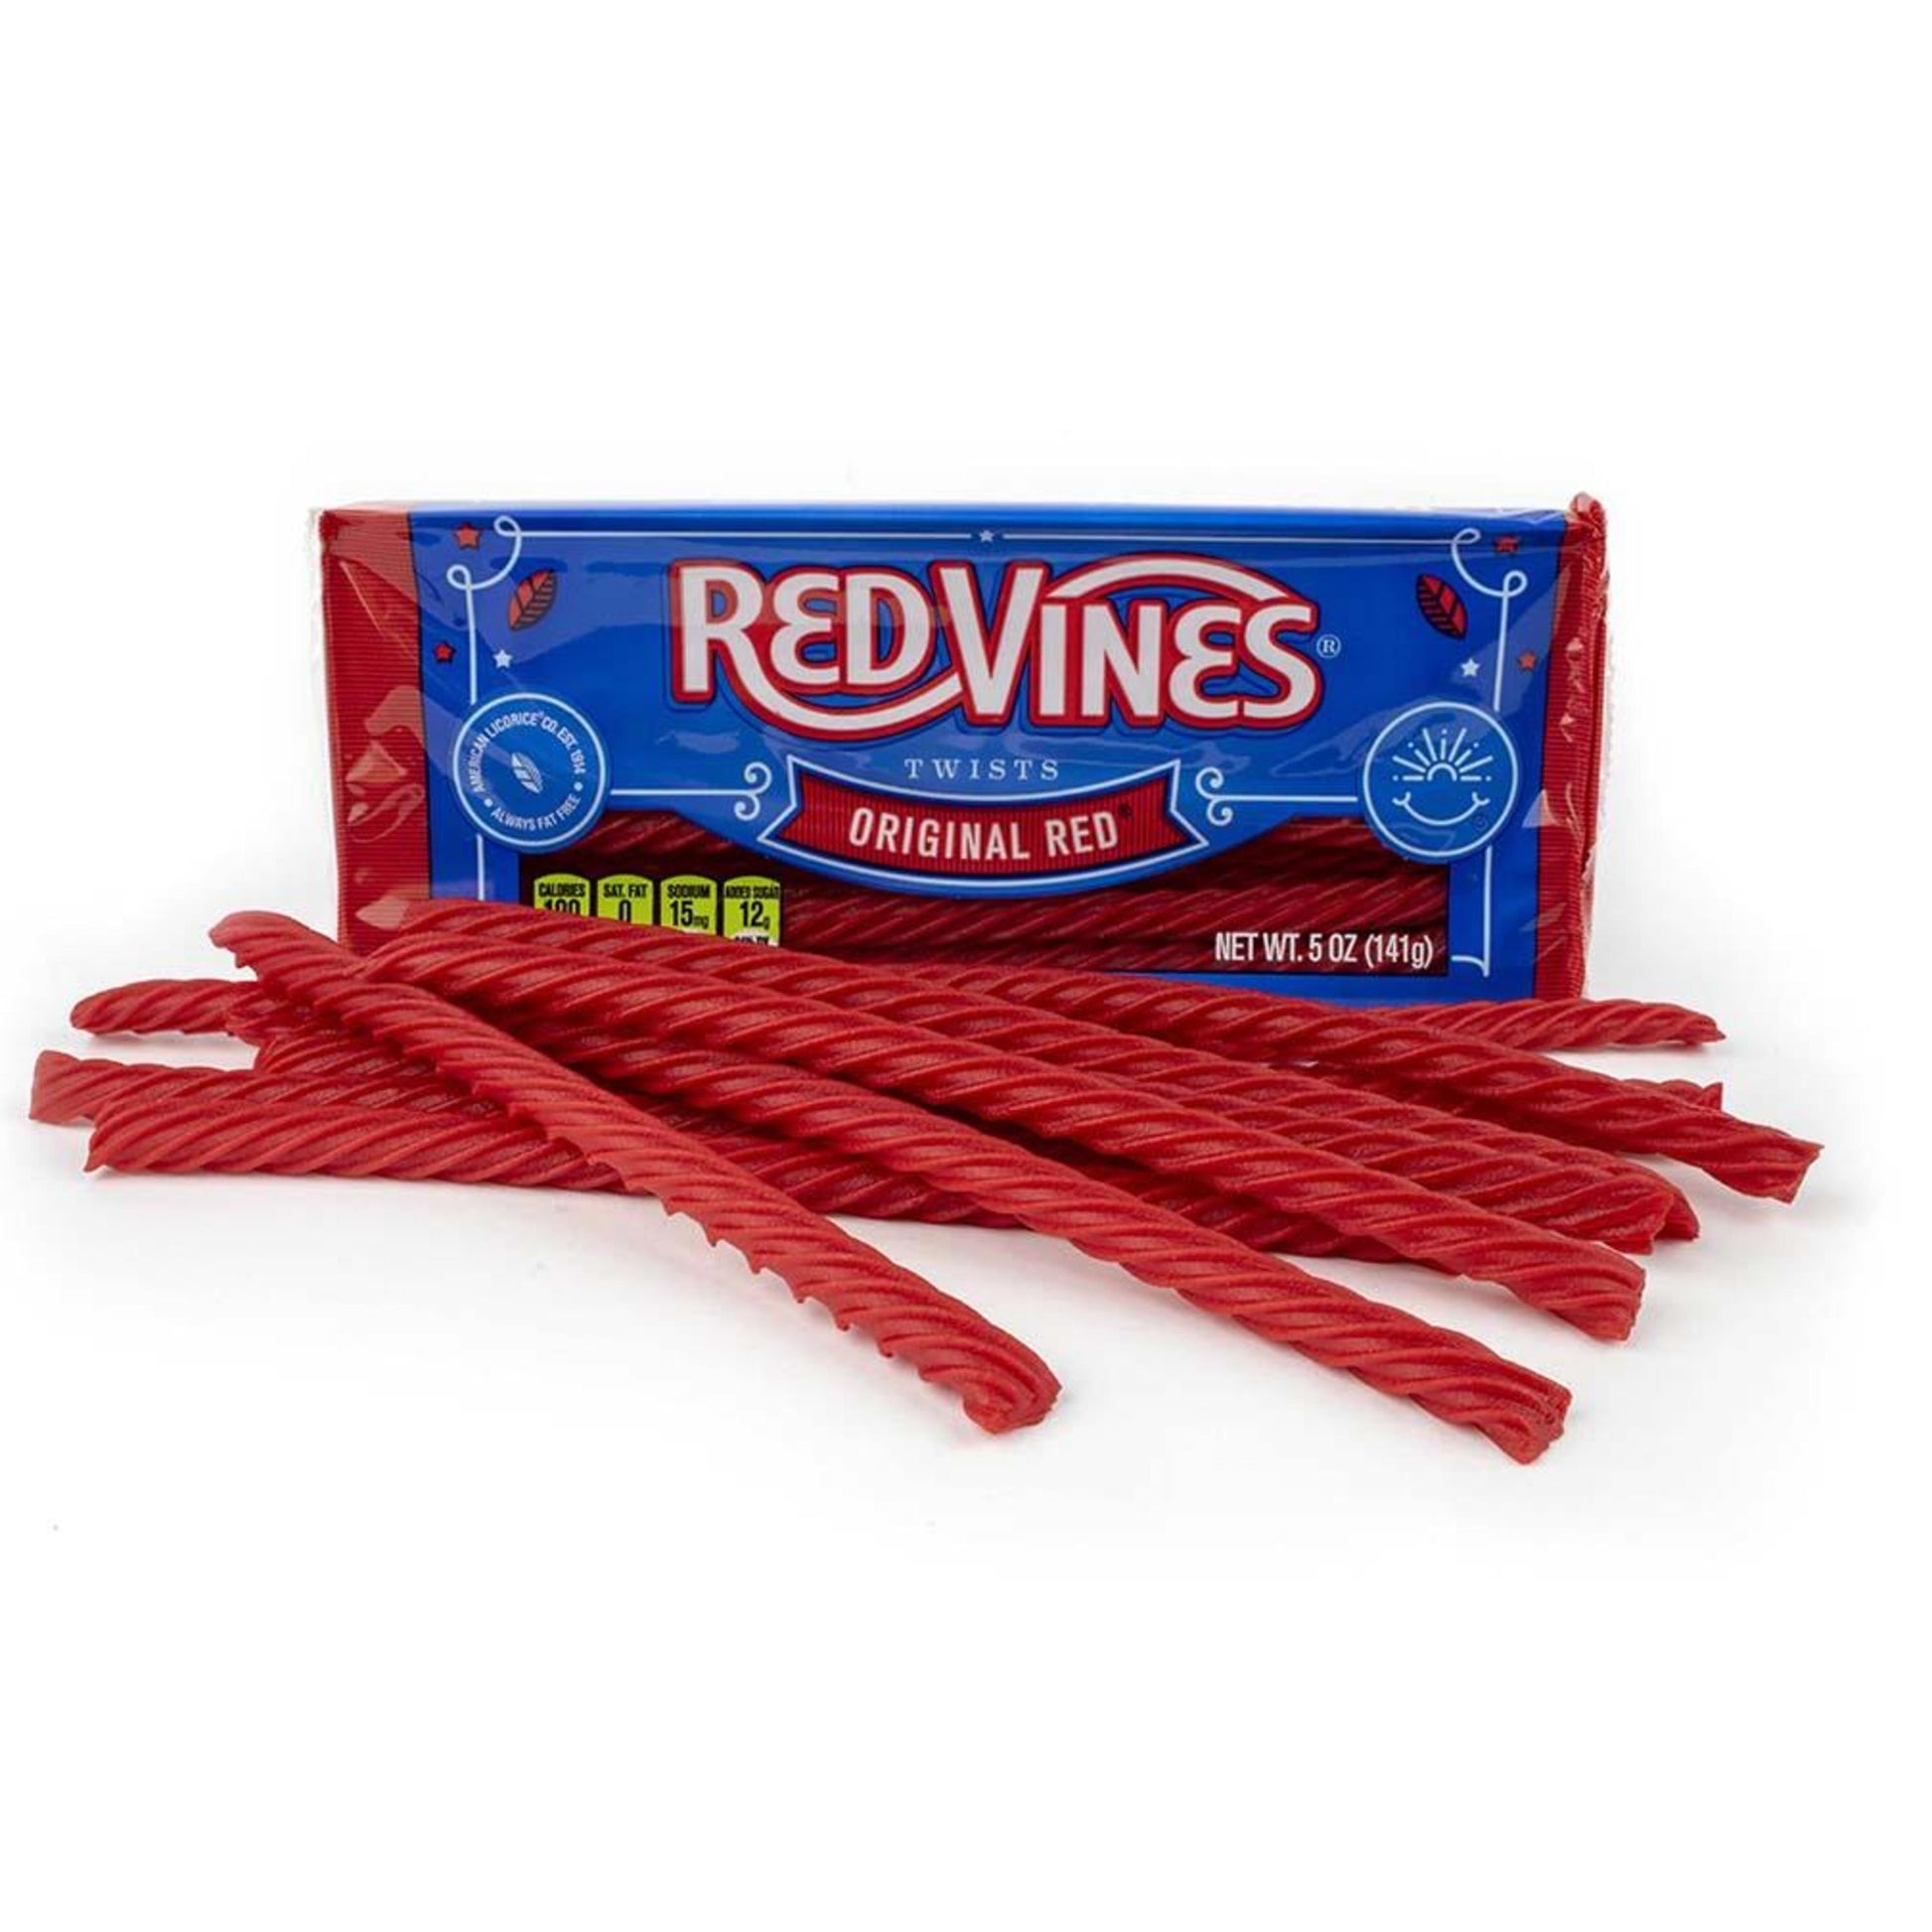 RED VINES Original Red licorice twists 5oz tray with candy in front